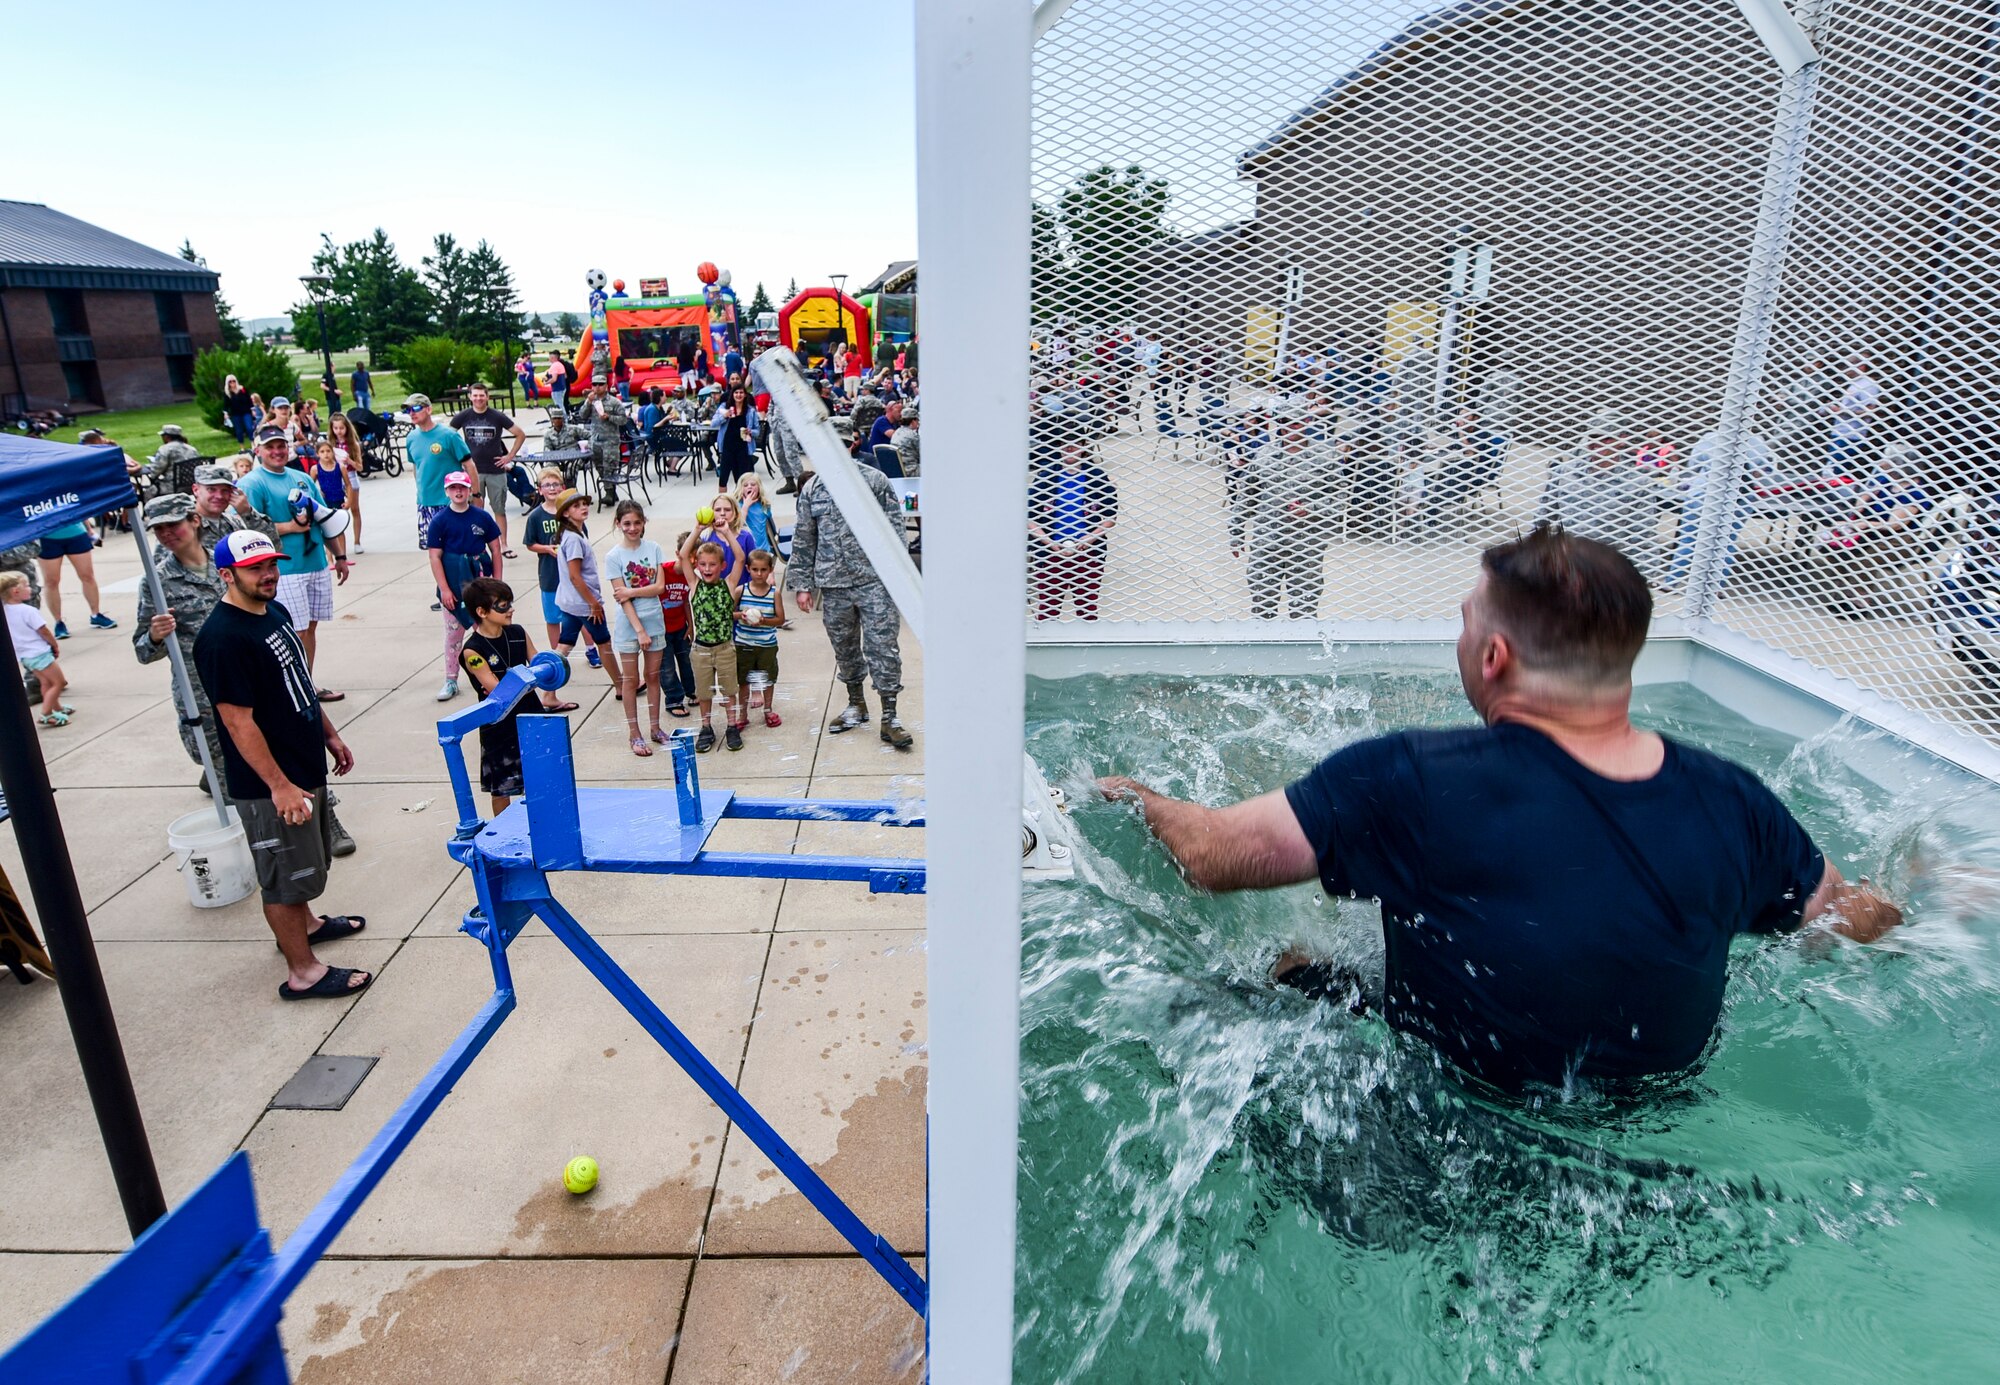 Senior Master Sgt. Edward Mueller, 28th Logistics Readiness Squadron superintendent of fuels management, falls into a dunk tank during the annual base picnic outside the Dakota’s Club on Ellsworth Air Force Base, S.D., June 22, 2018. The dunk tank event was part of the Air Force Ball Dunk-a-Leader fundraiser, which involved nominating base leadership to be dunked in a tank of water, and the money raised from the event will go toward the base’s 2018 Air Force Ball in September. (U.S. Air Force photo by Senior Airman Randahl J. Jenson)